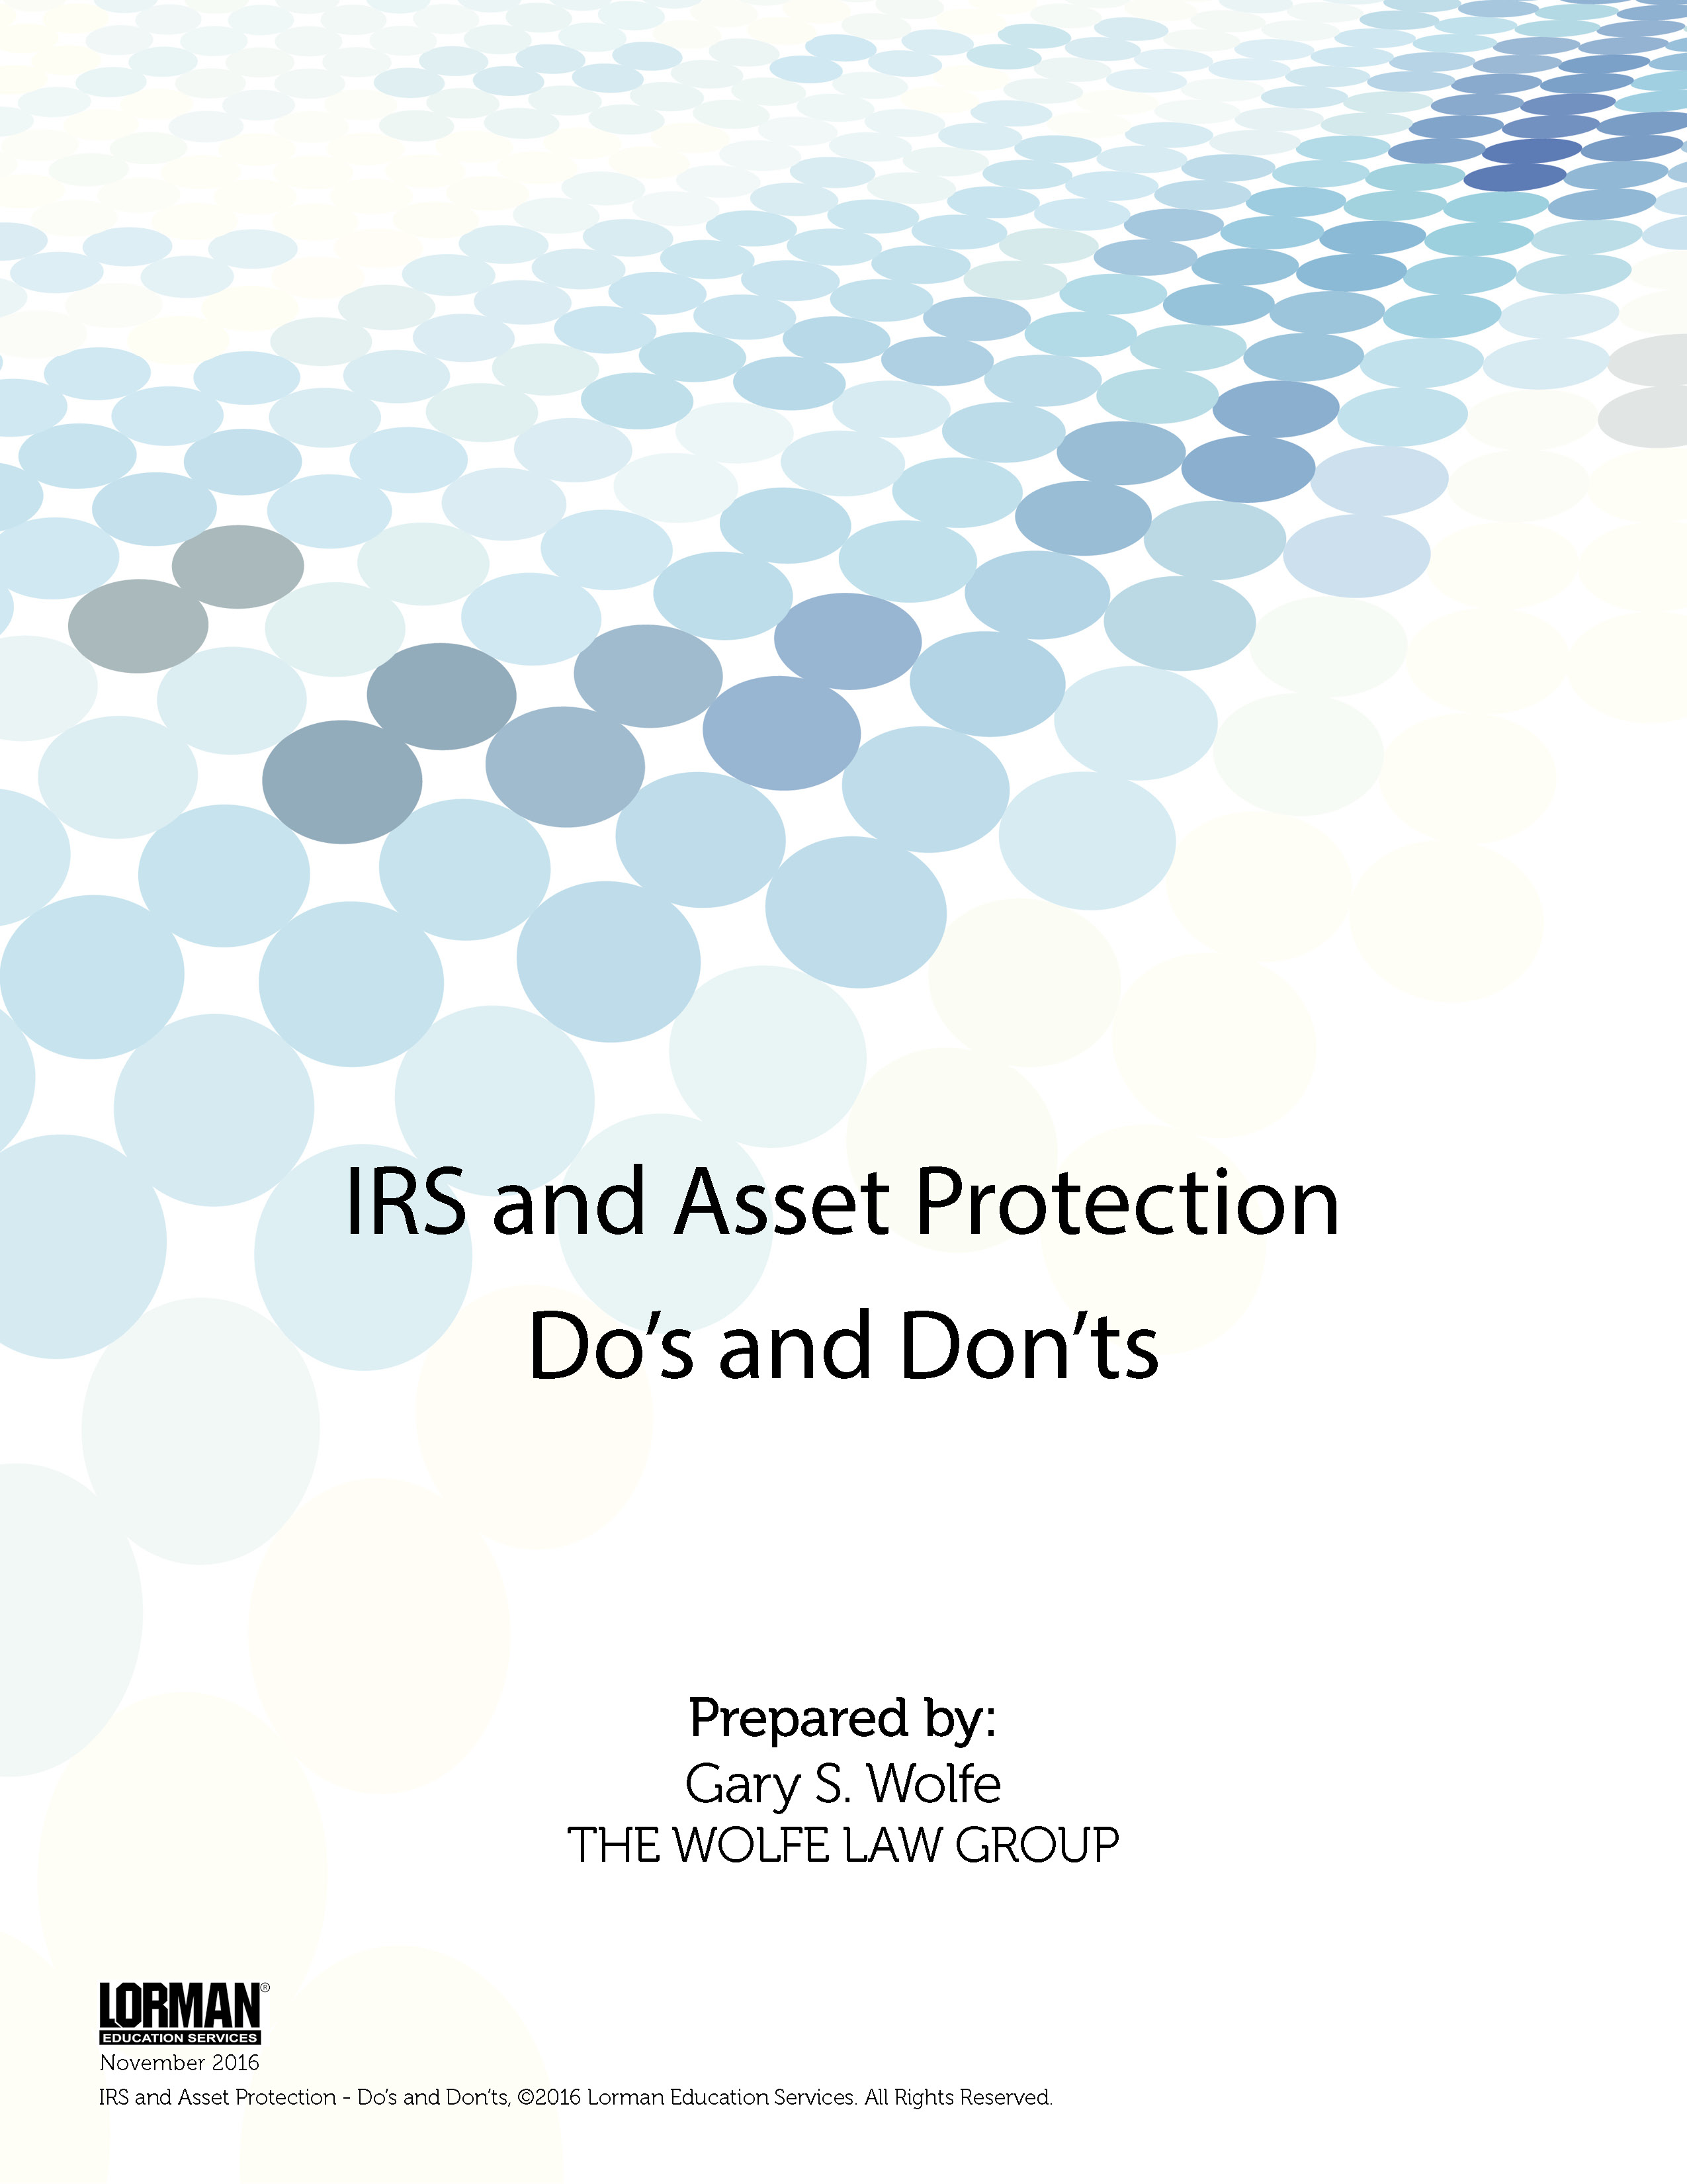 IRS and Asset Protection - DOs and DON’Ts